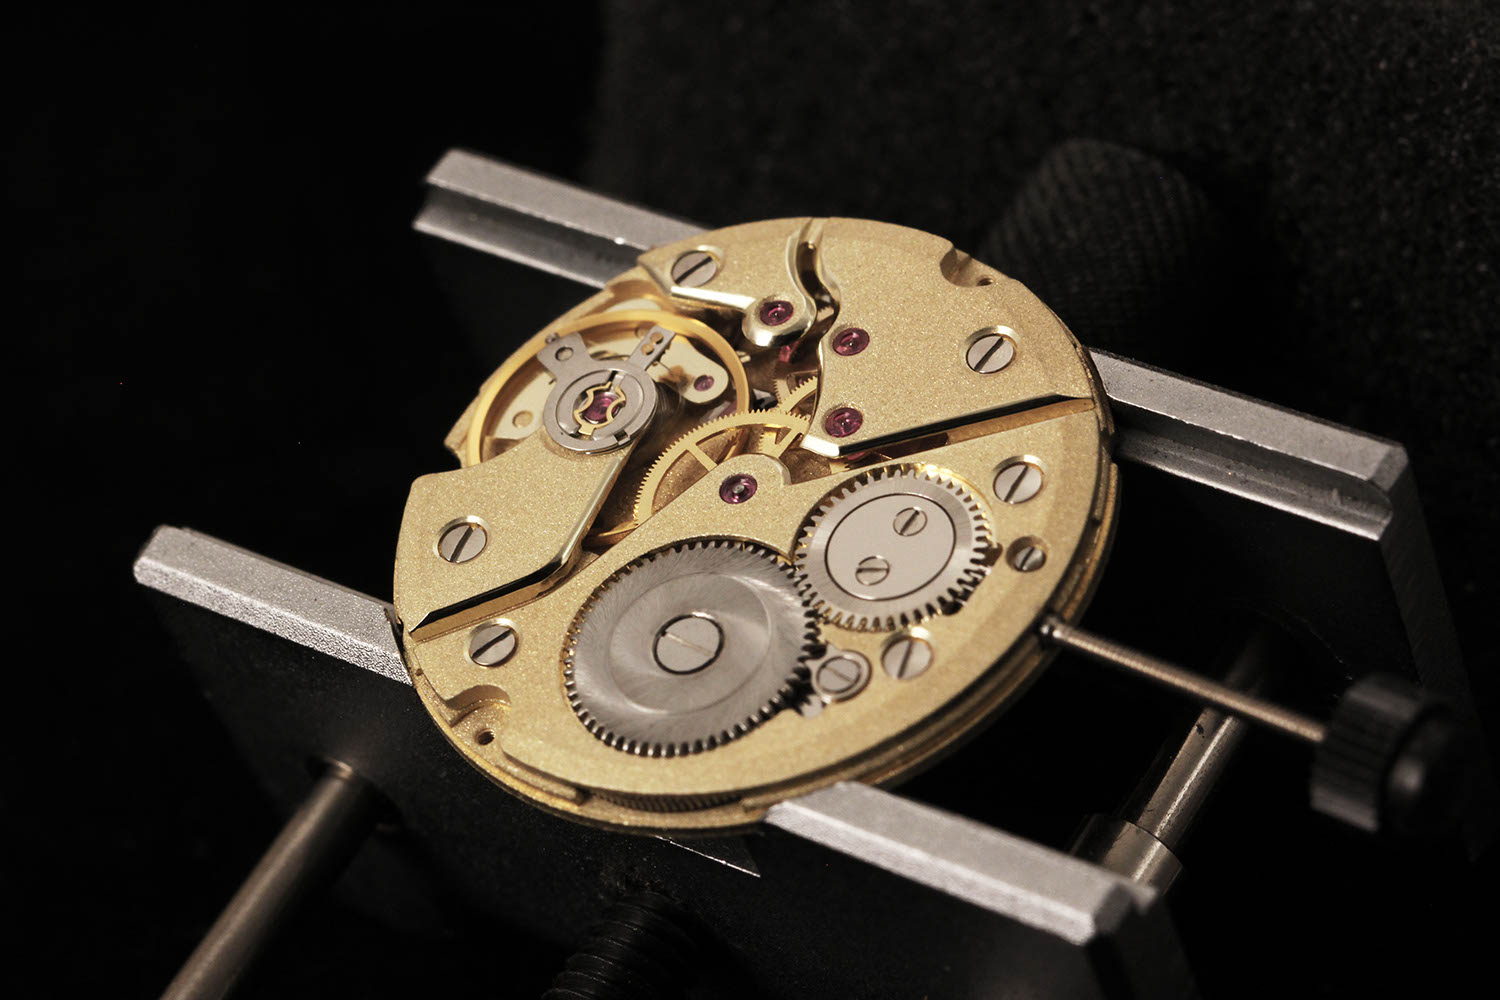 The heavily reworked Peseux 7001 manually wound movement destined for the RAW Ornament Pale Gold